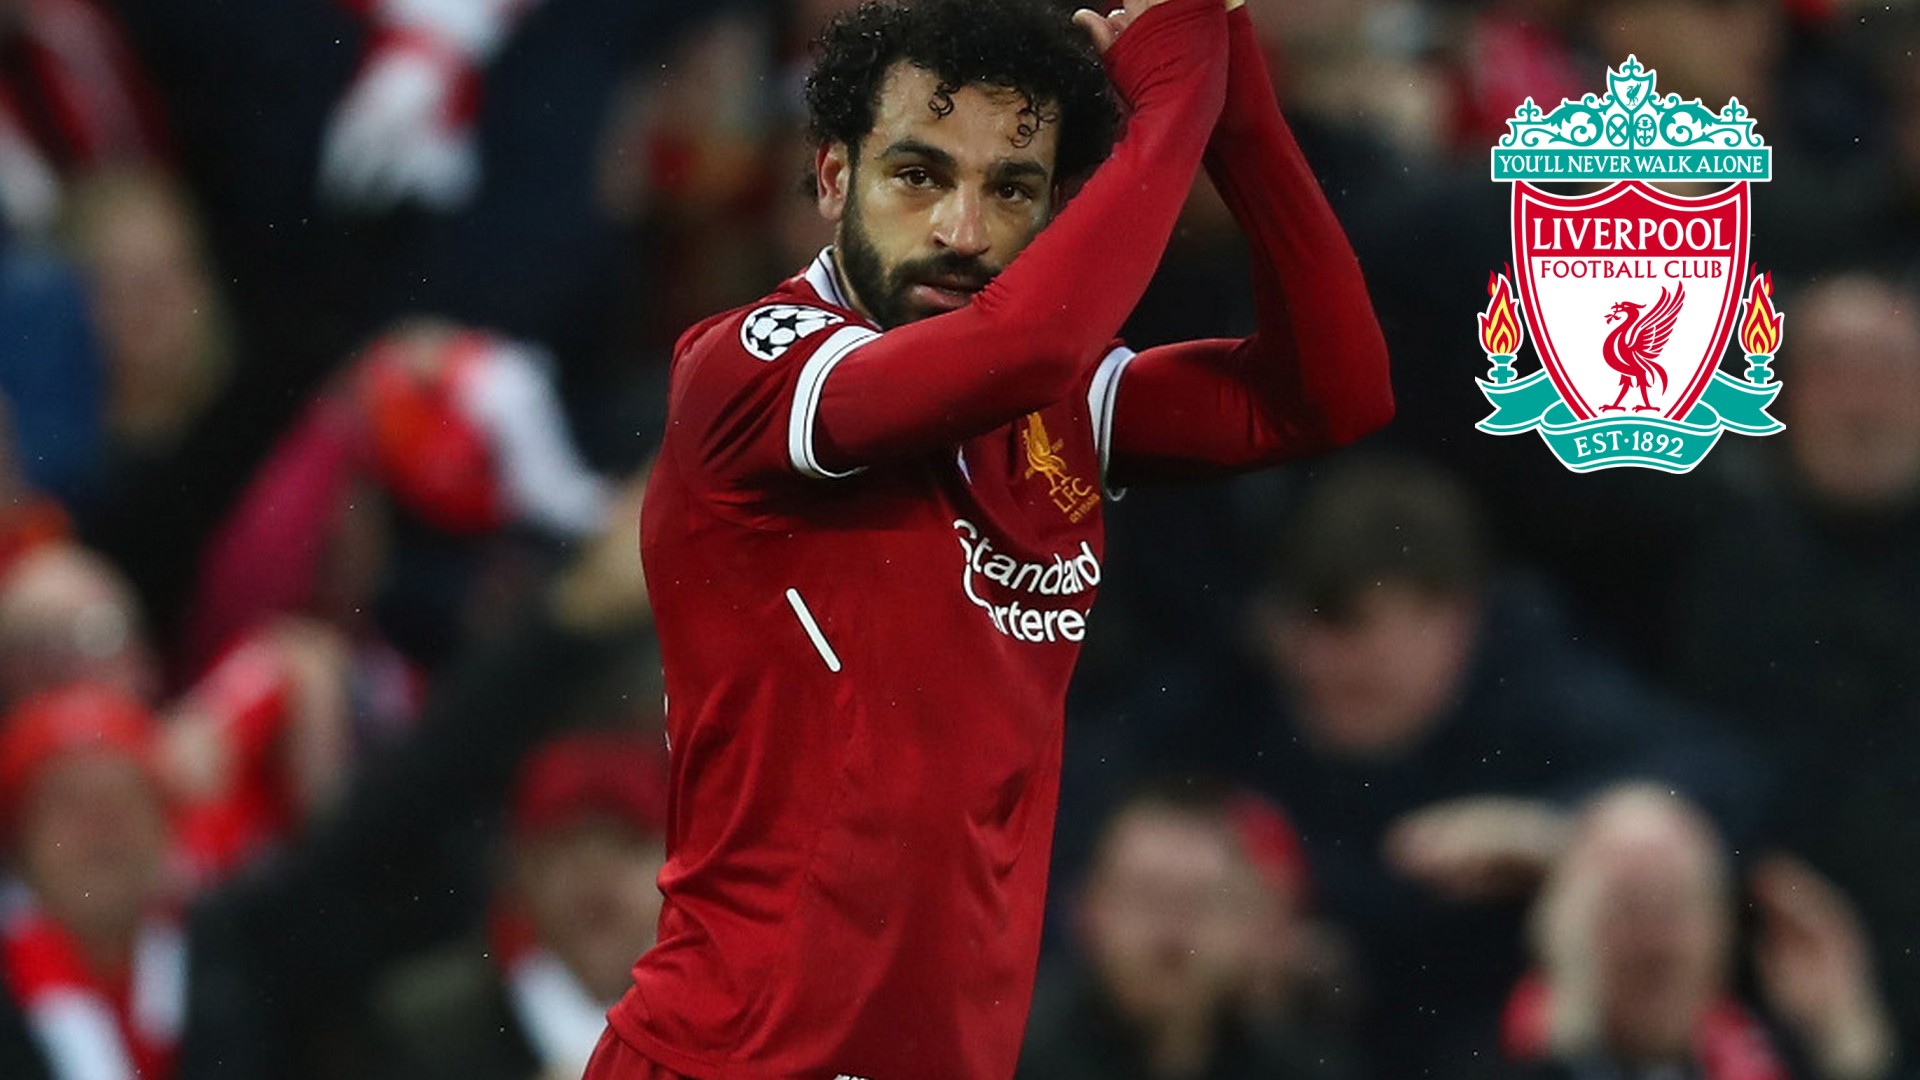 HD Wallpaper Mohamed Salah with image resolution 1920x1080 pixel. You can make this wallpaper for your Desktop Computer Backgrounds, Mac Wallpapers, Android Lock screen or iPhone Screensavers